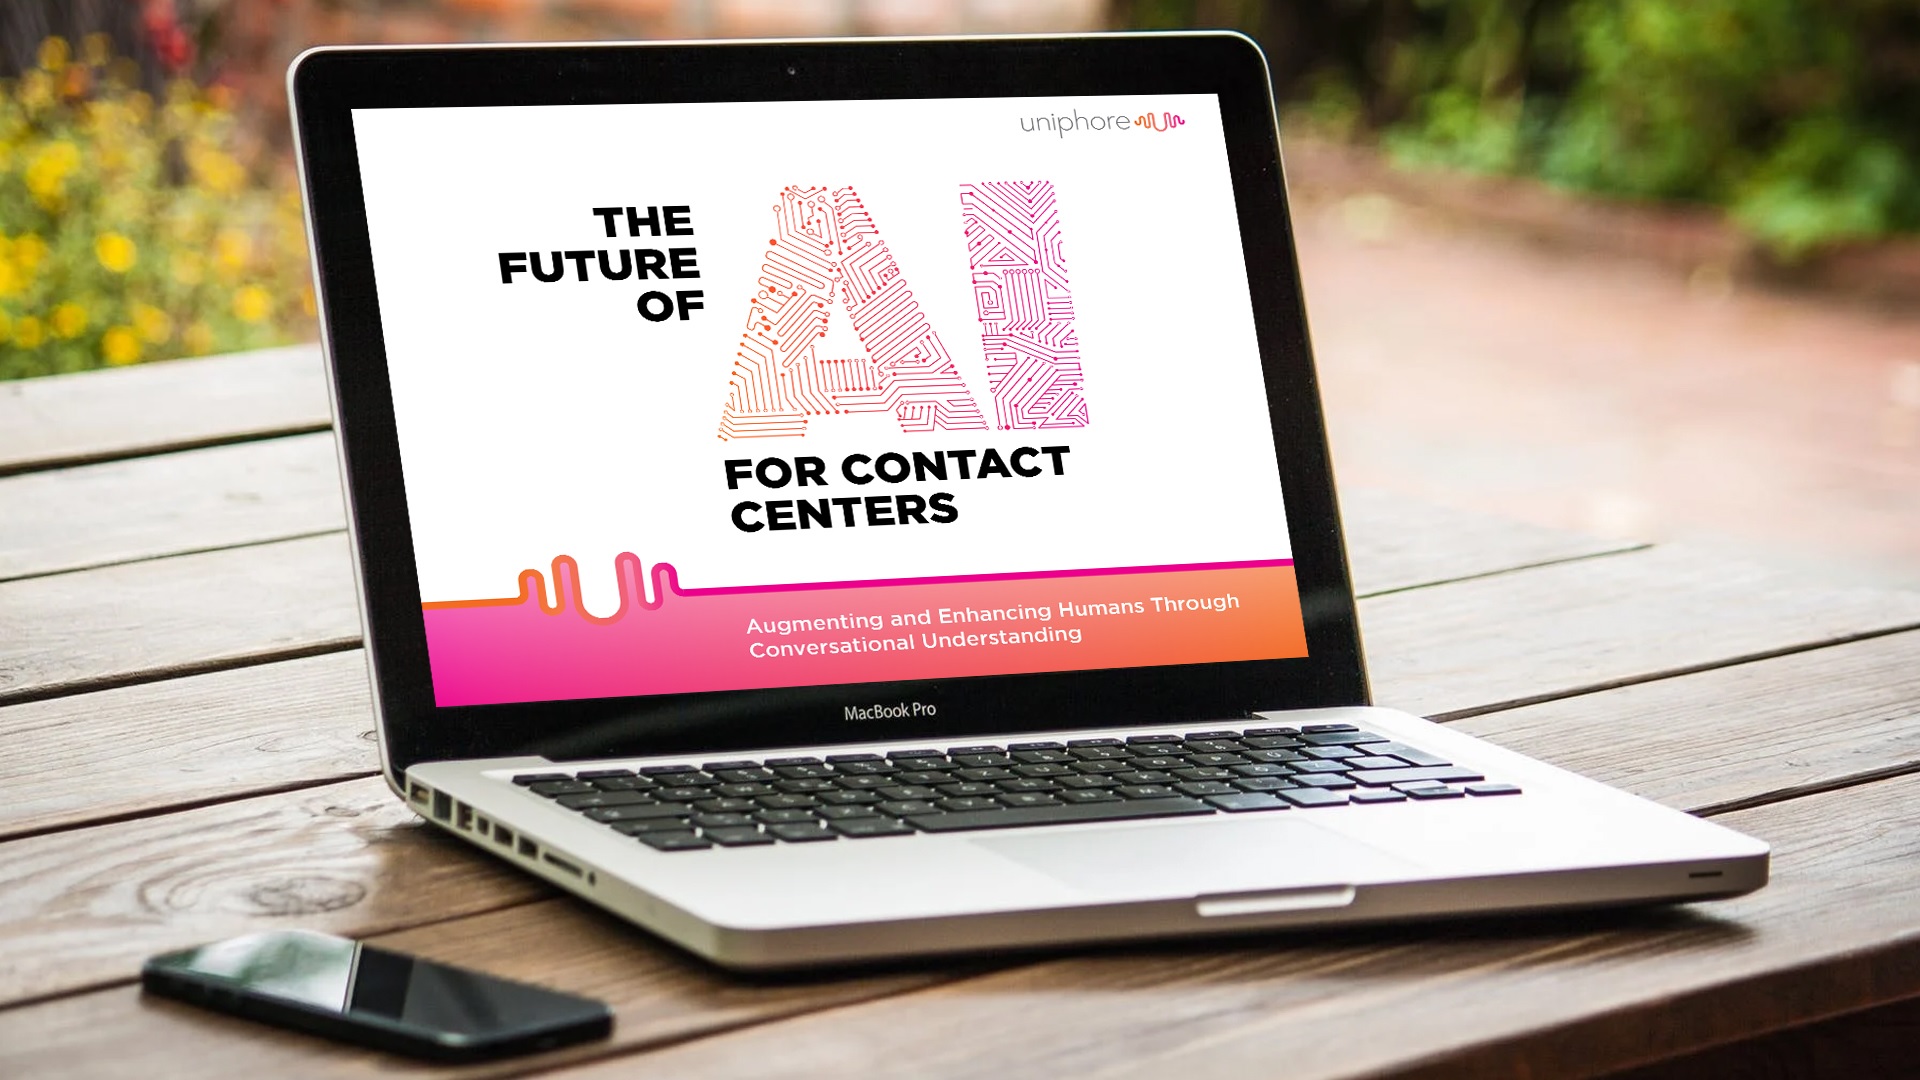 Contact centers transform the future with AI